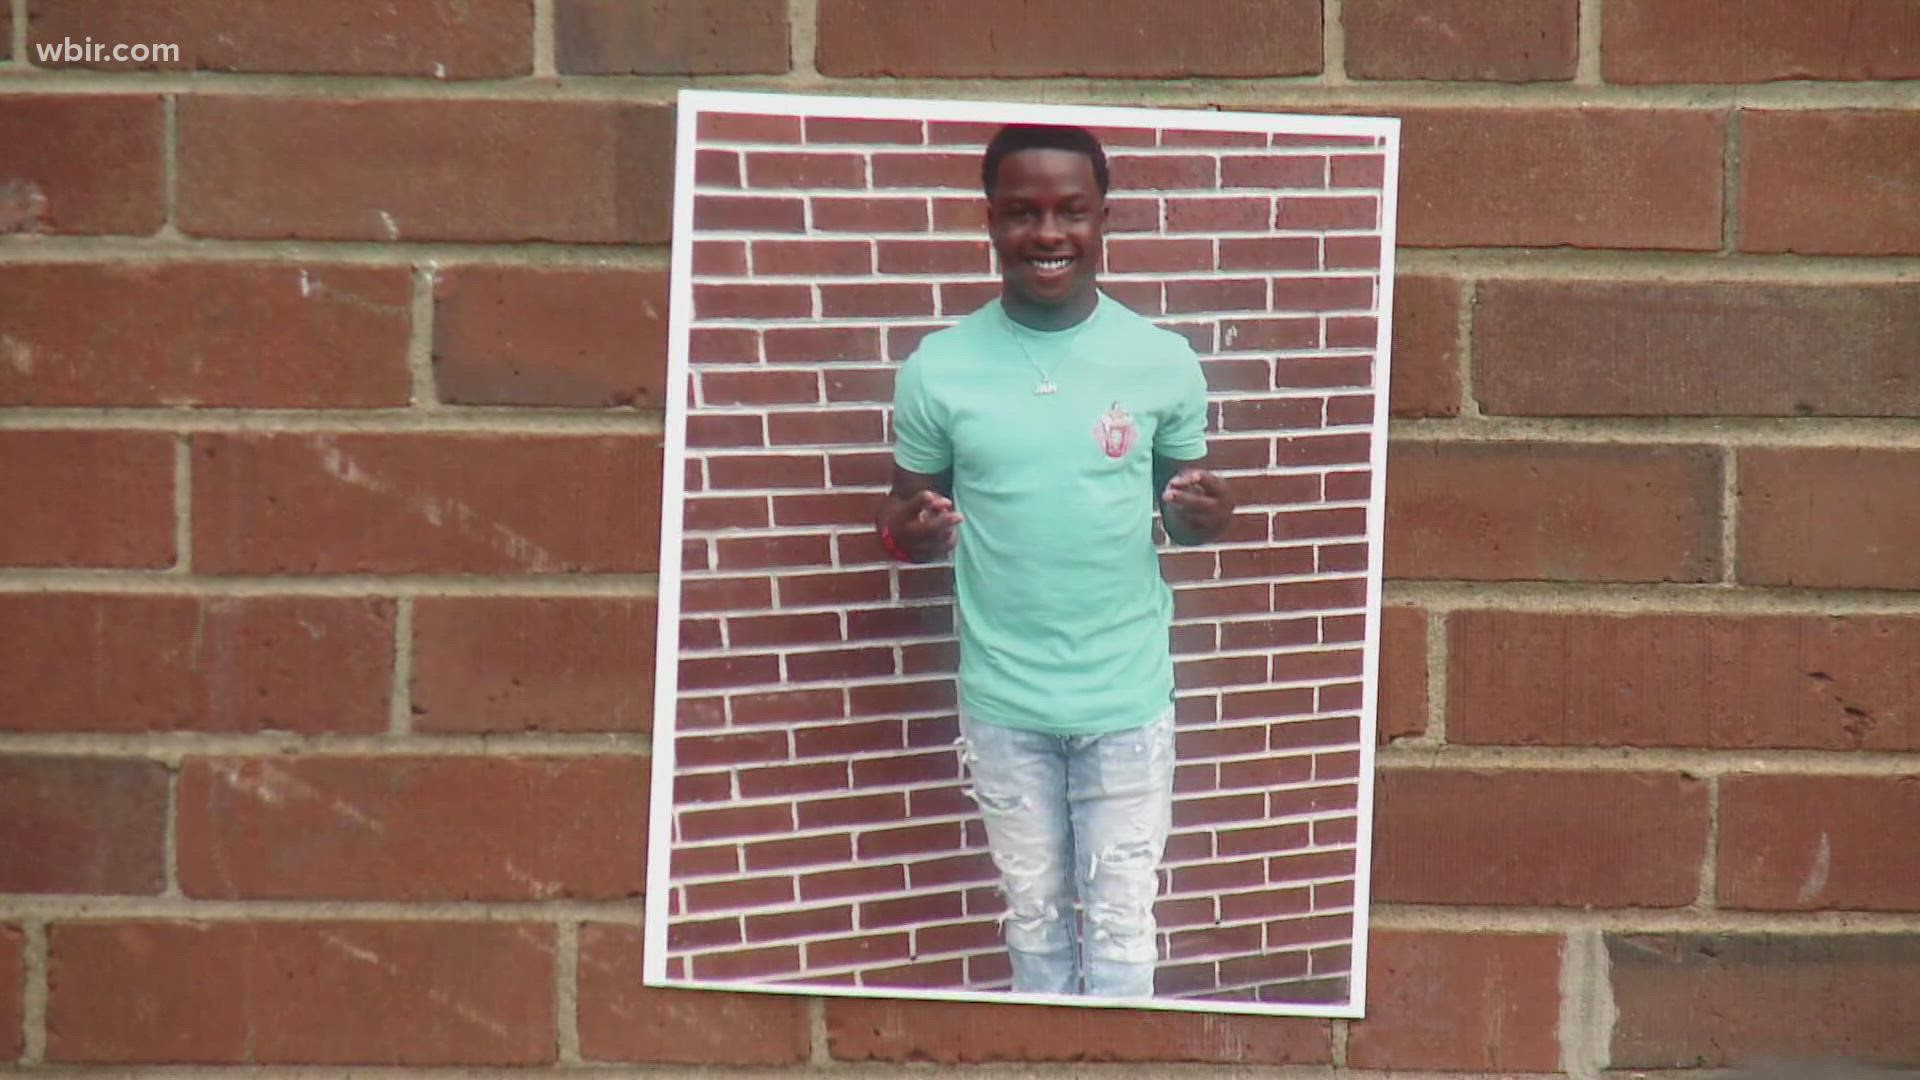 The Lonsdale Community is hoping for answers after a teenager was shot and killed in their neighborhood this weekend.